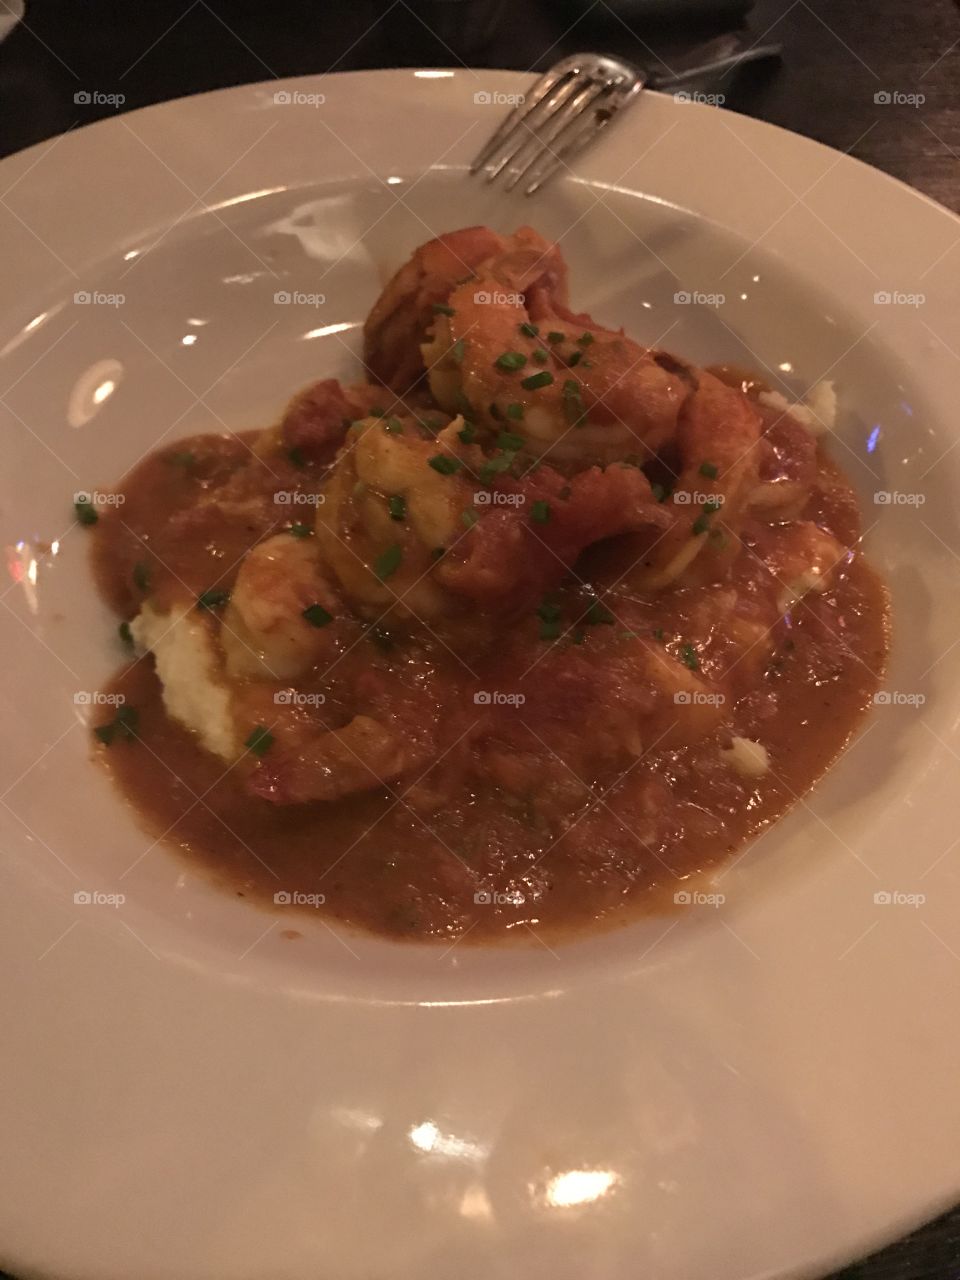 Shrimp and Grits 